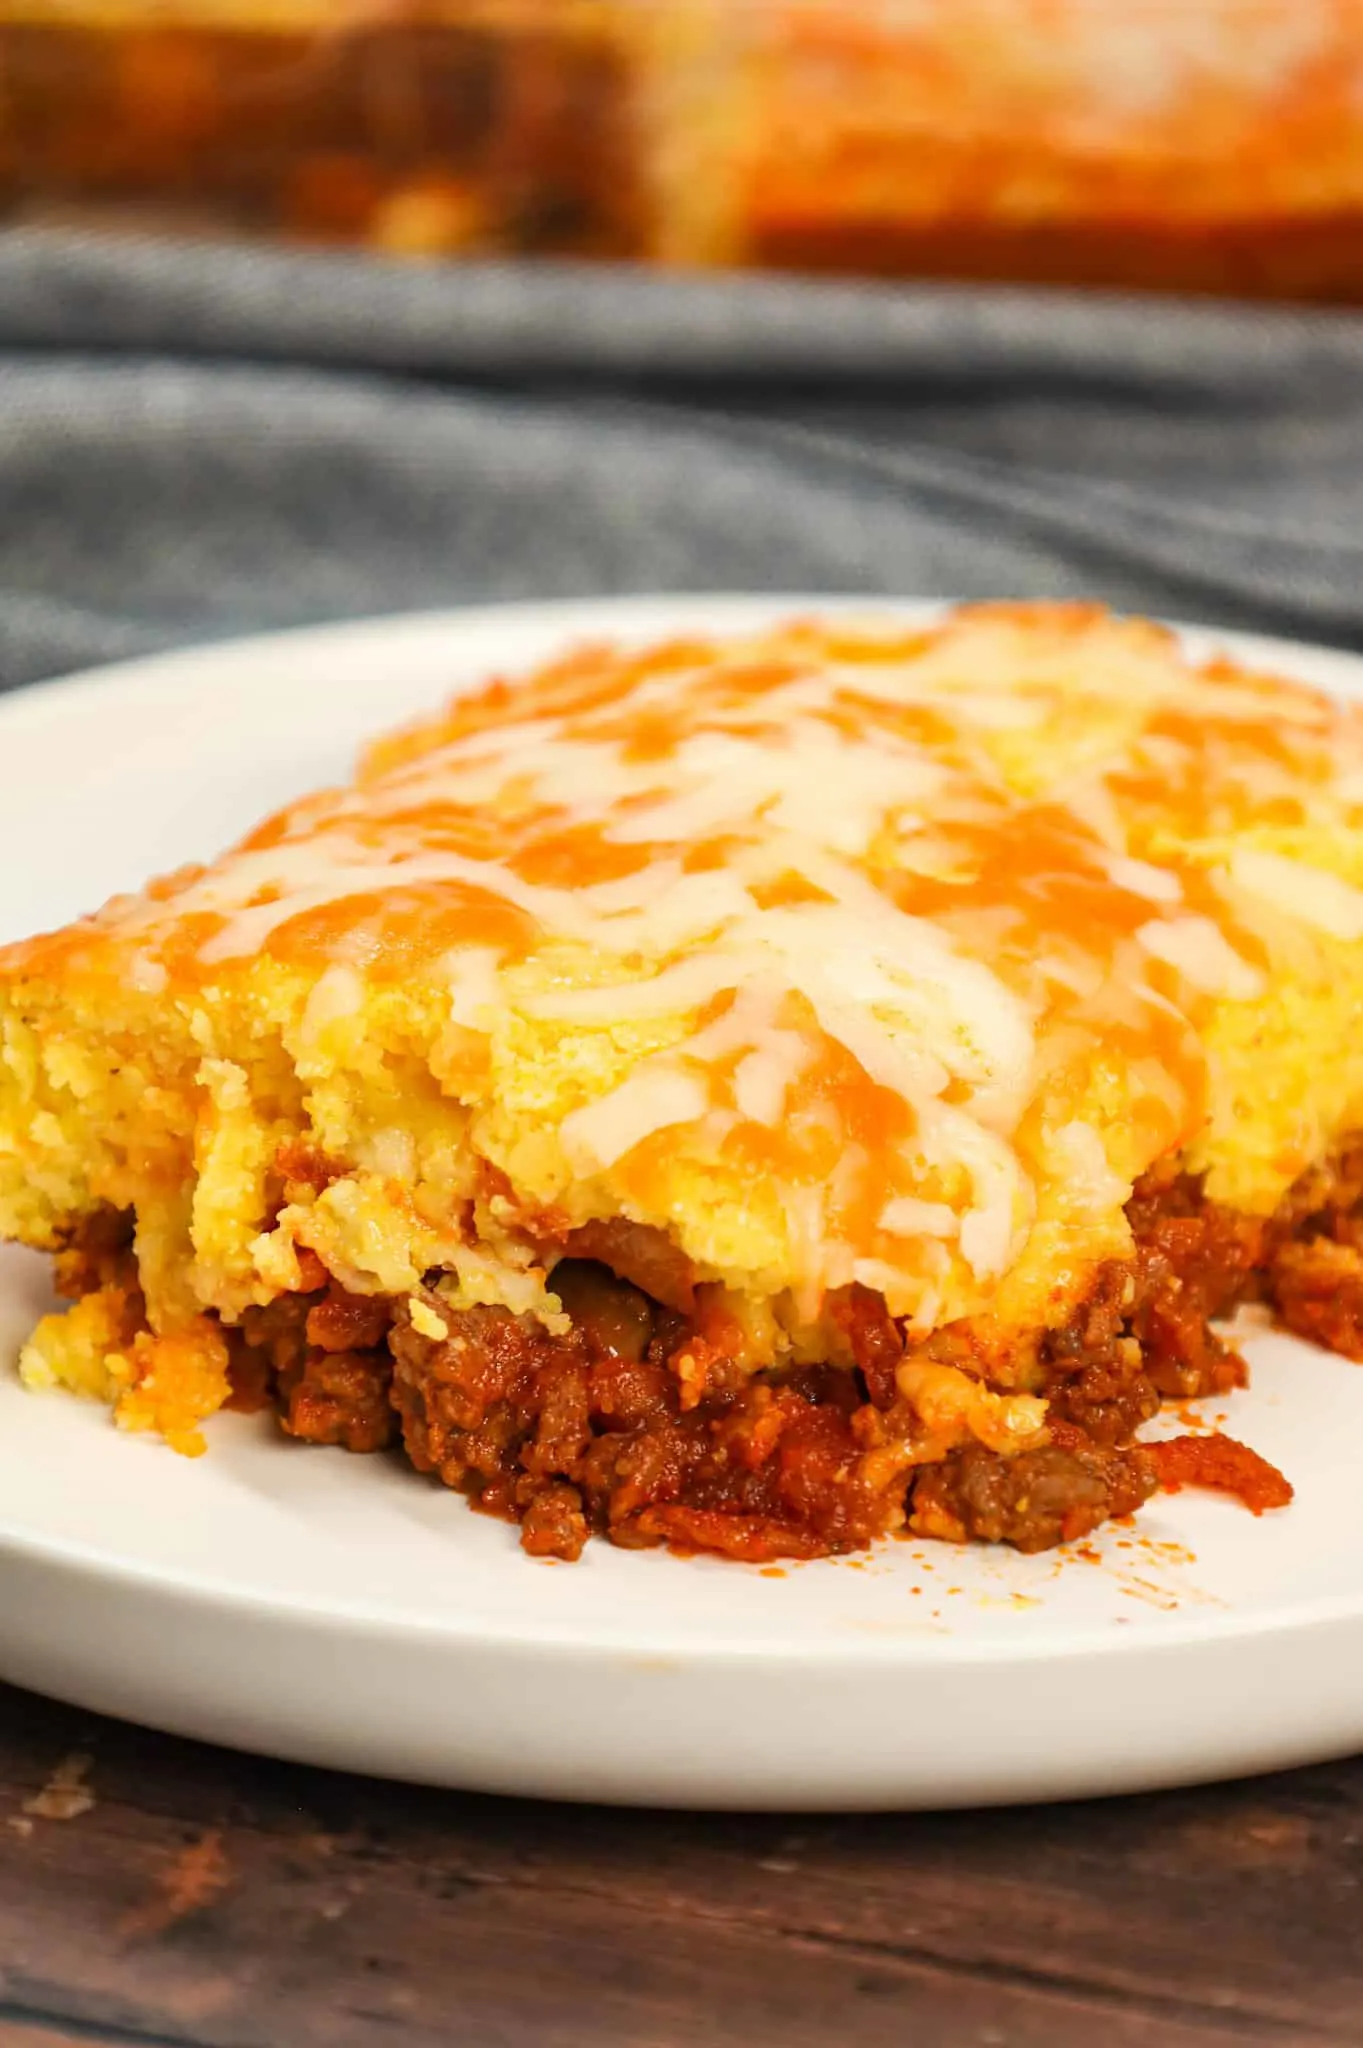 Sloppy Joe Cornbread Casserole is a hearty hamburger casserole with a base of crumbled ground beef in sloppy joe sauce topped with a layer of Jiffy cornbread.